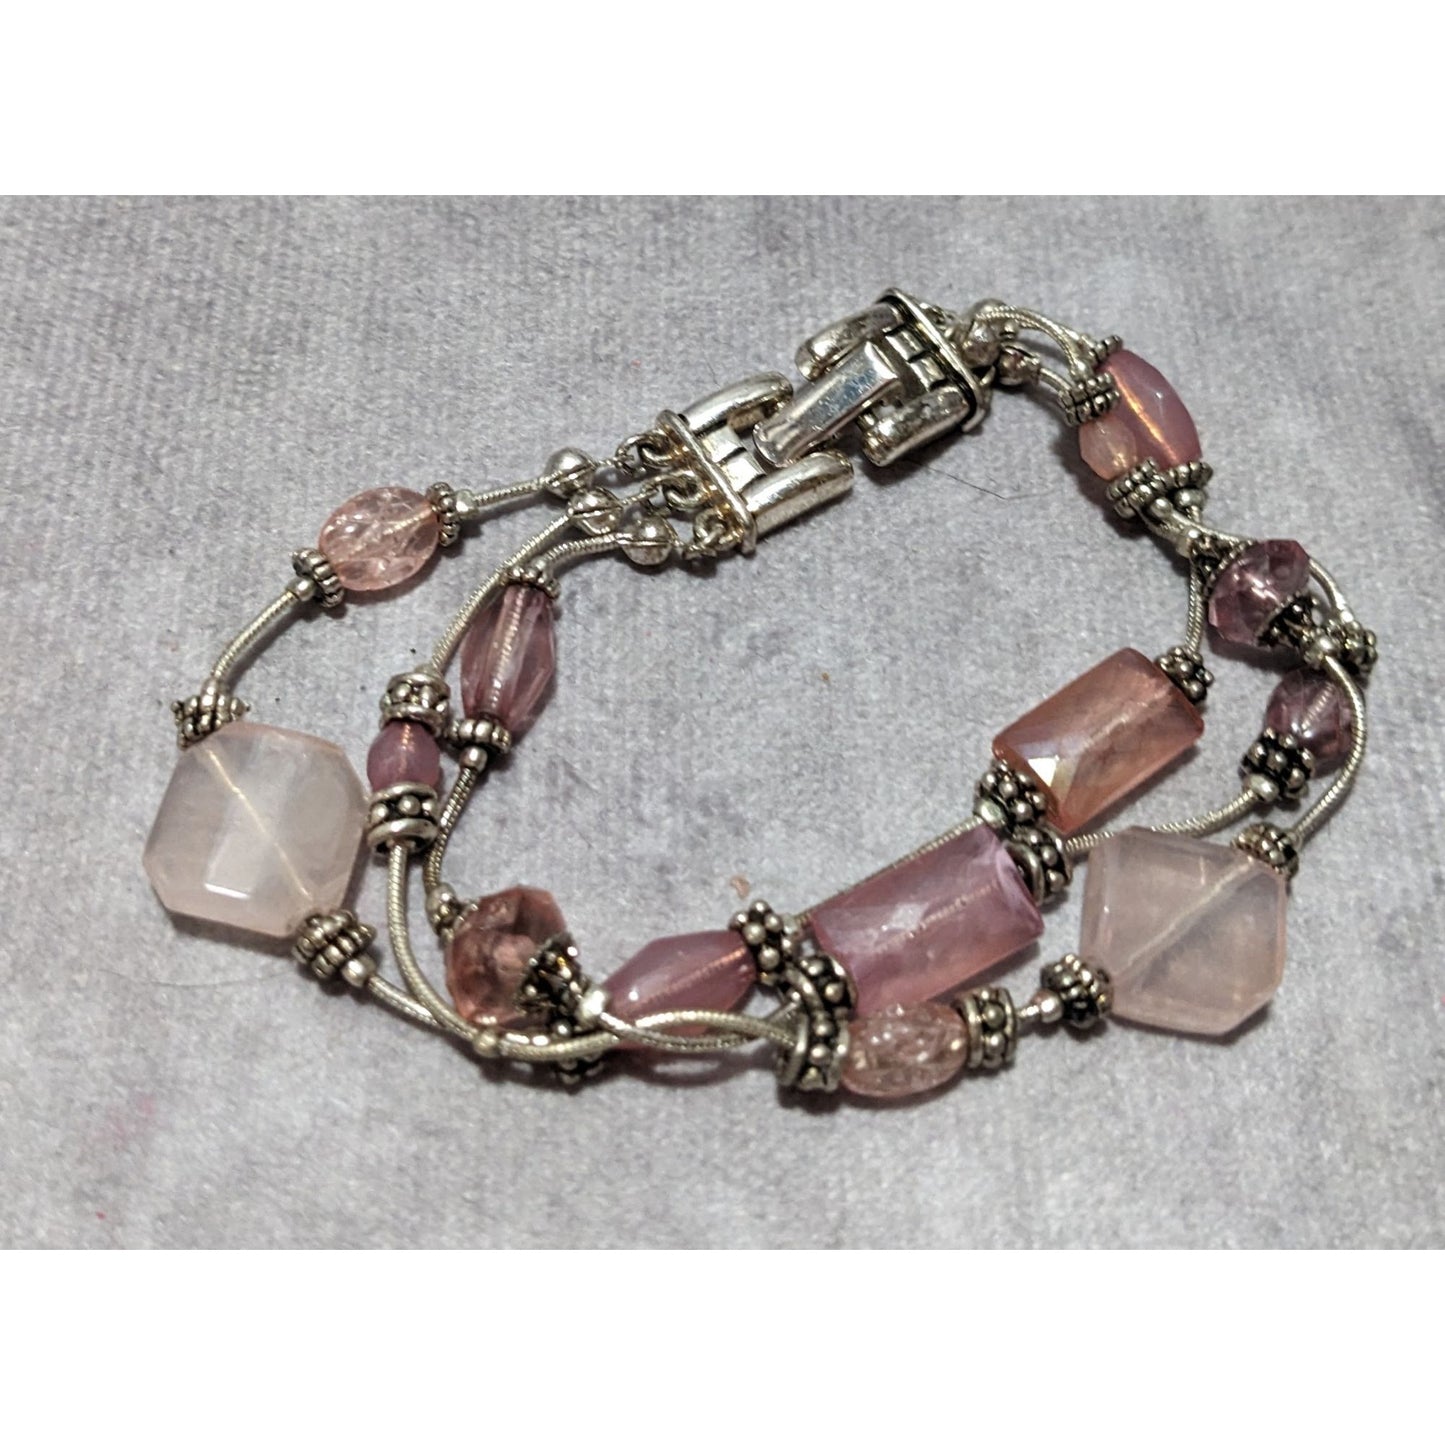 Pink And Silver Glass Beaded Bracelet